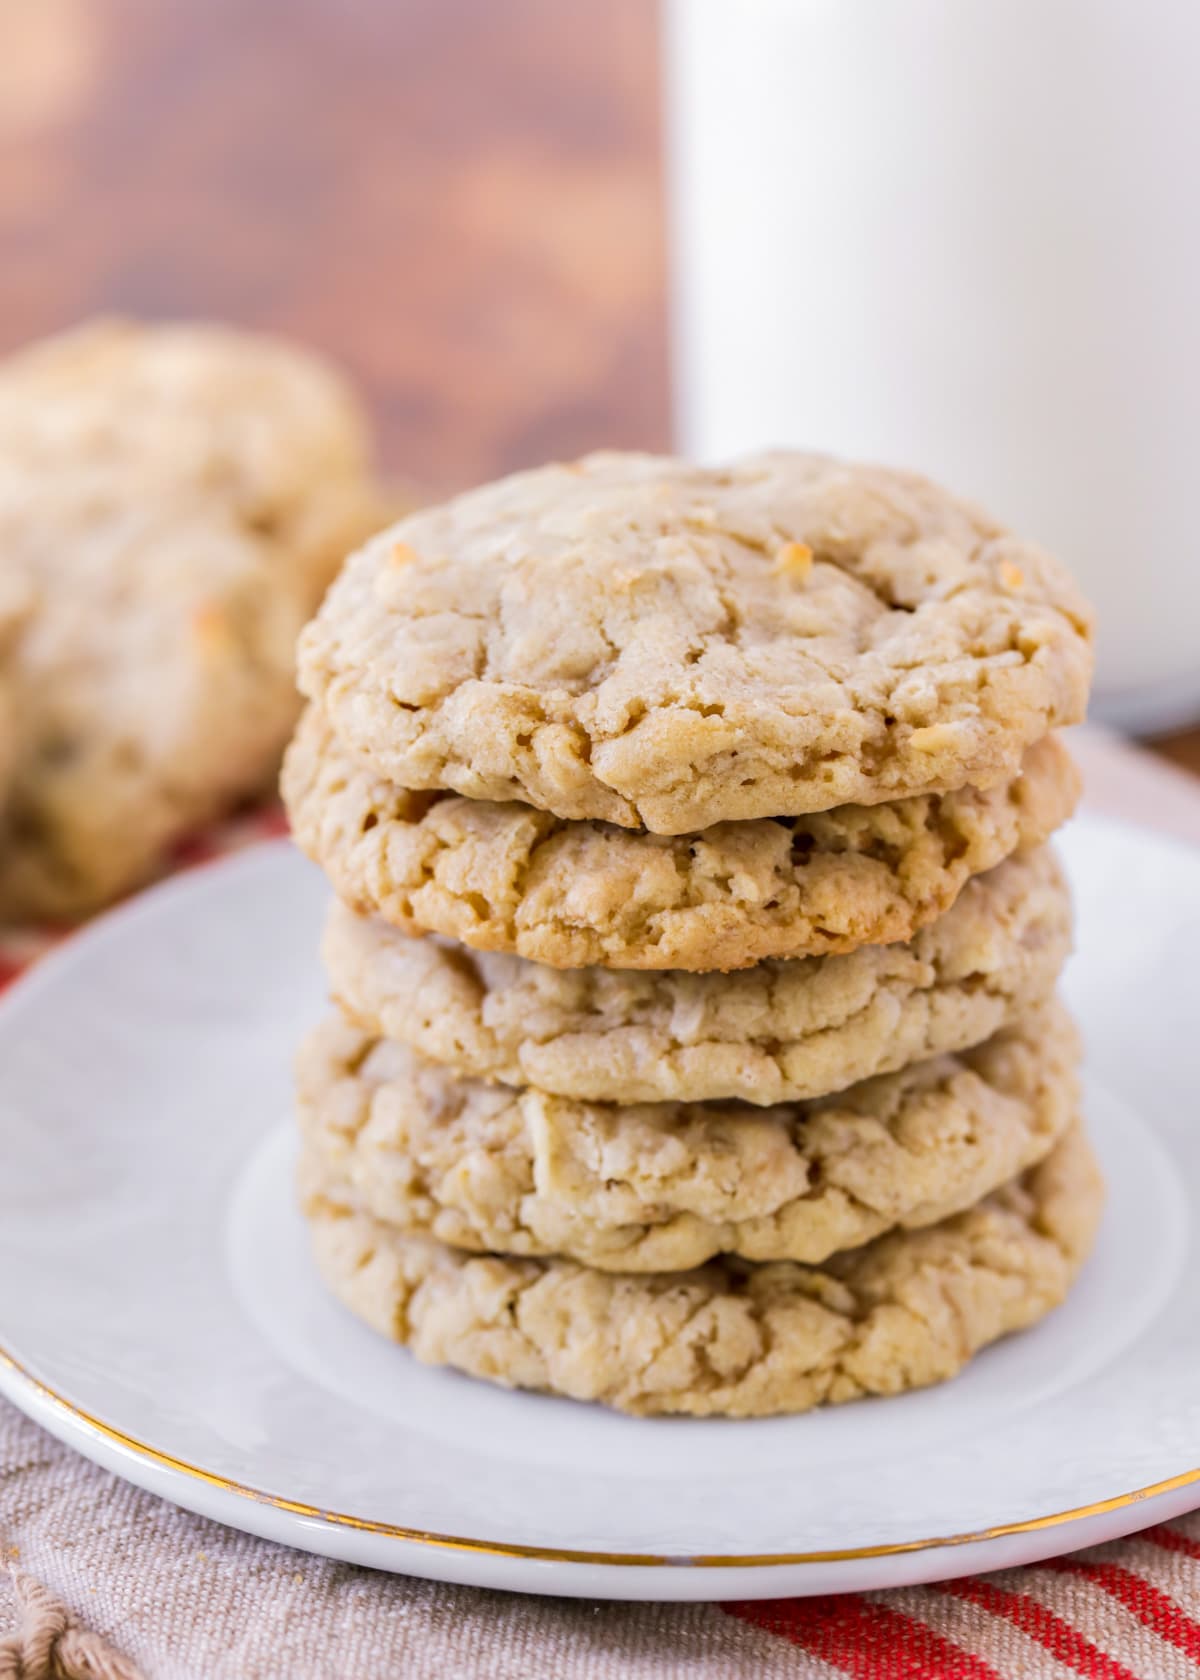 Oatmeal Coconut Cookies recipe close up image stacked on plate.